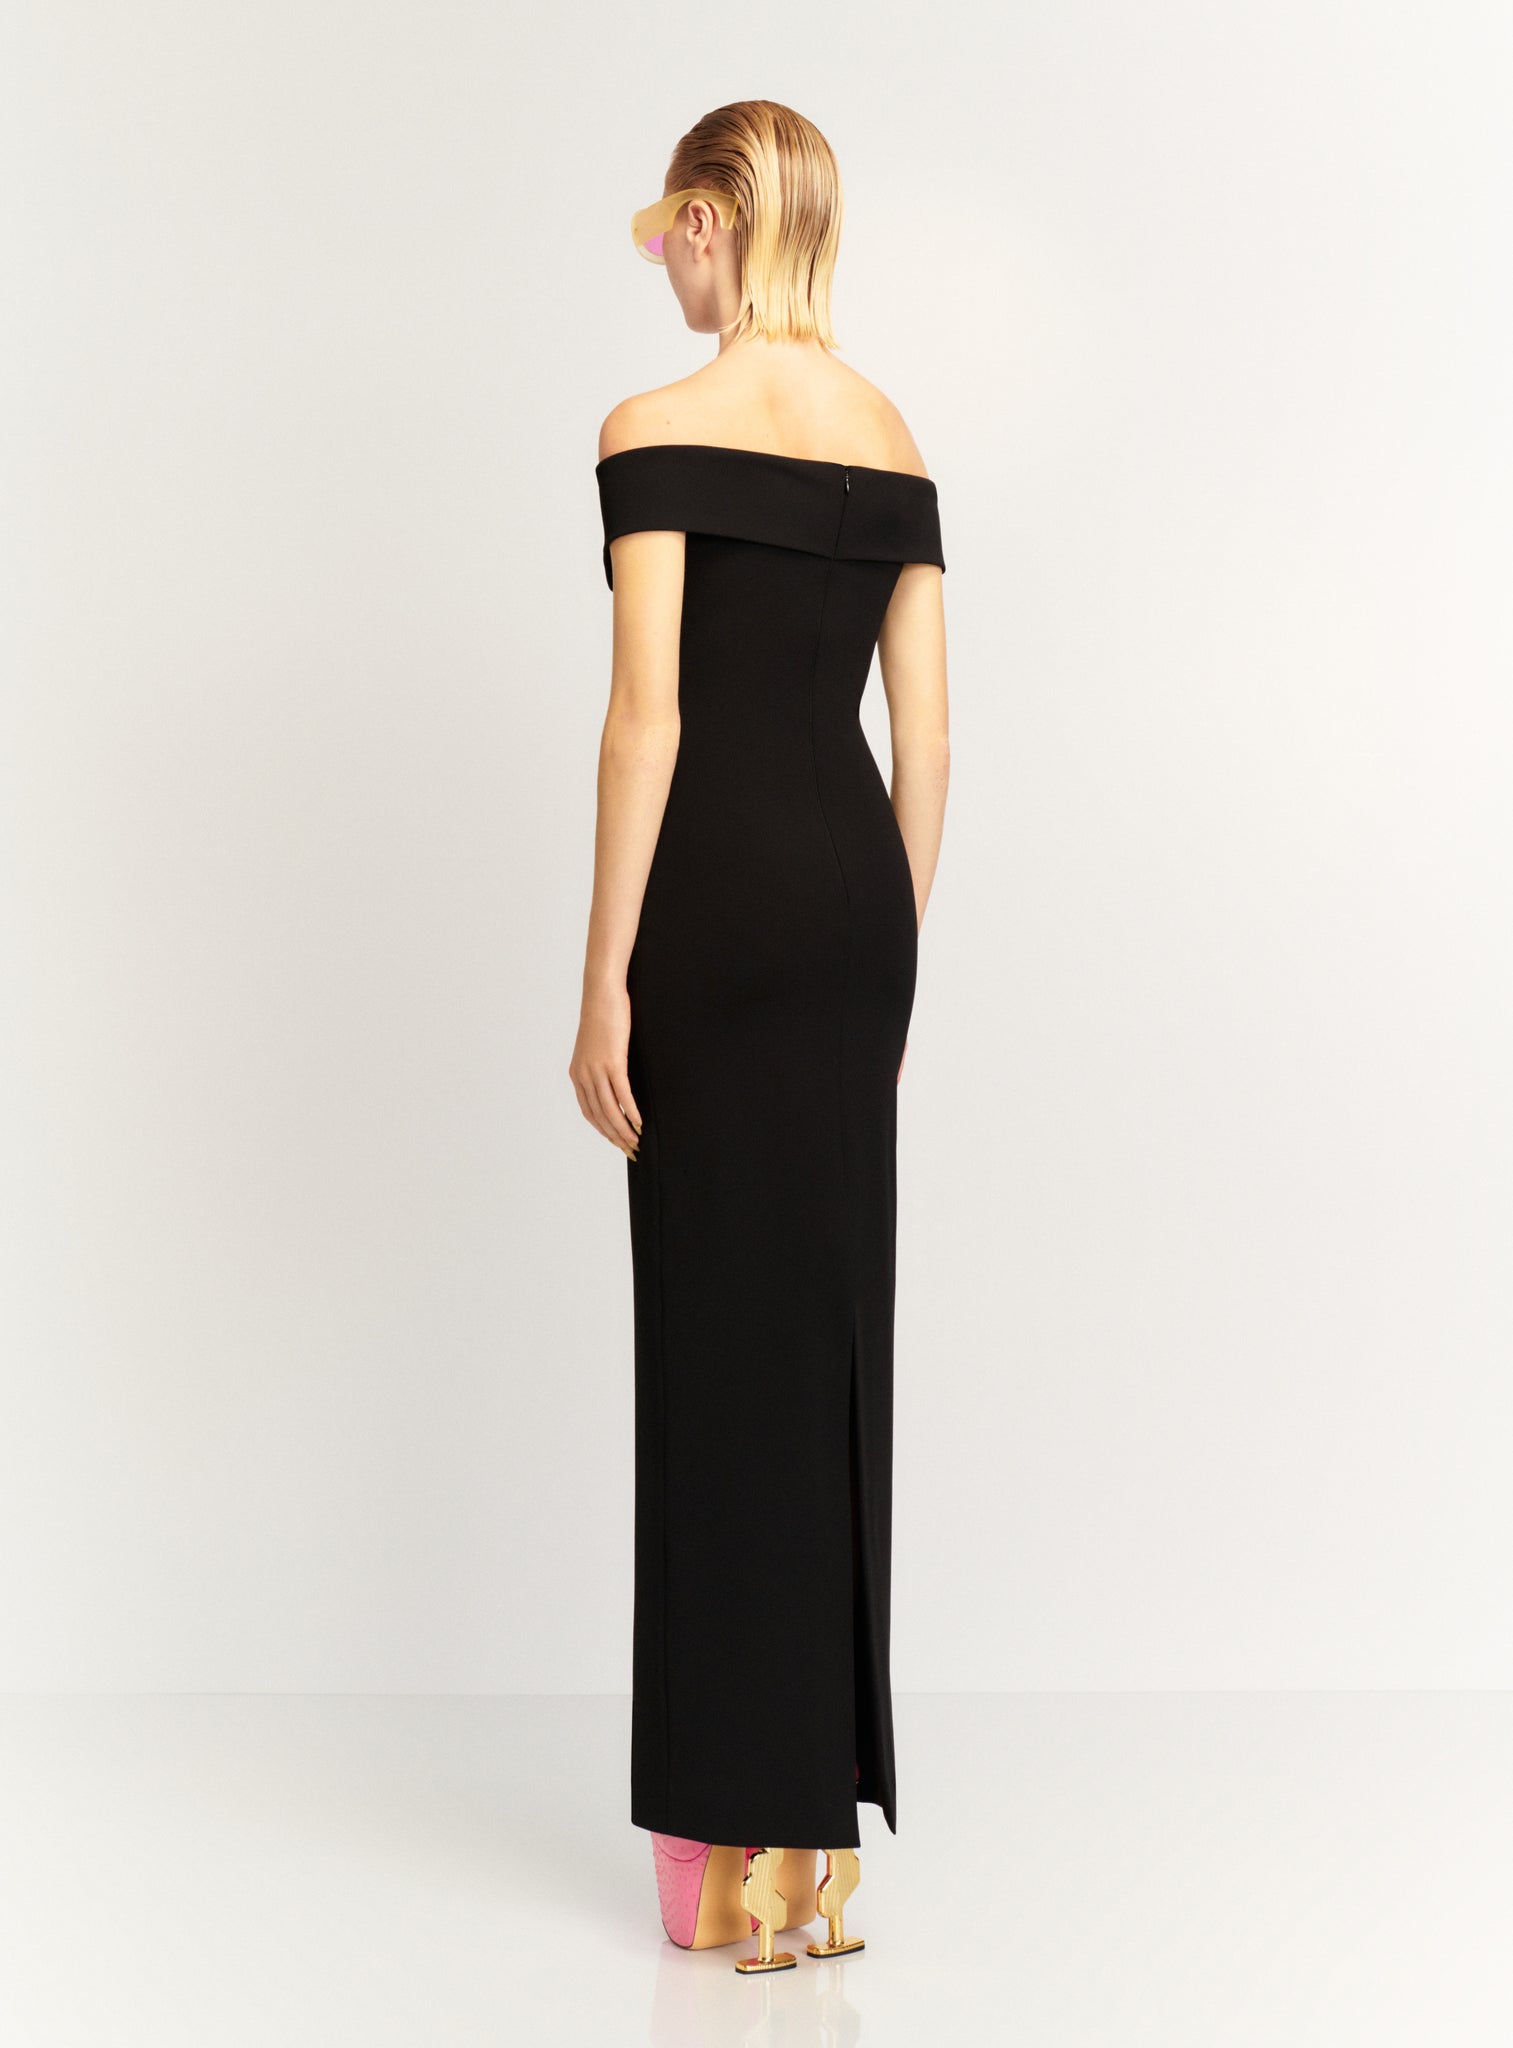 The Ines Maxi Dress in Black